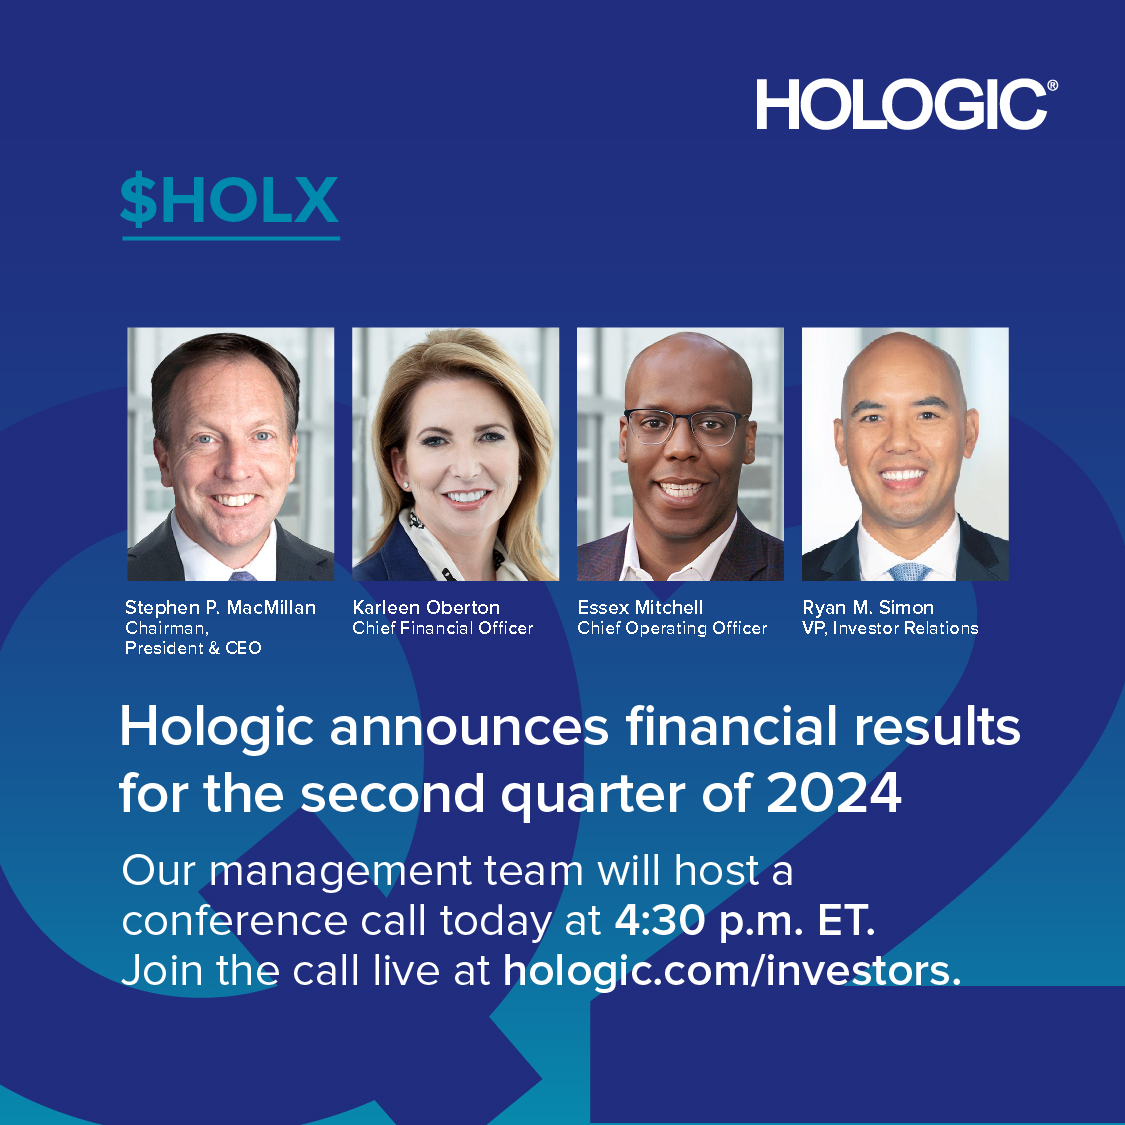 We just announced our second quarter fiscal 2024 financial results. Our management team will host a conference call at 4:30 p.m. ET. You can read the full release here:ow.ly/hCU150RvaTX